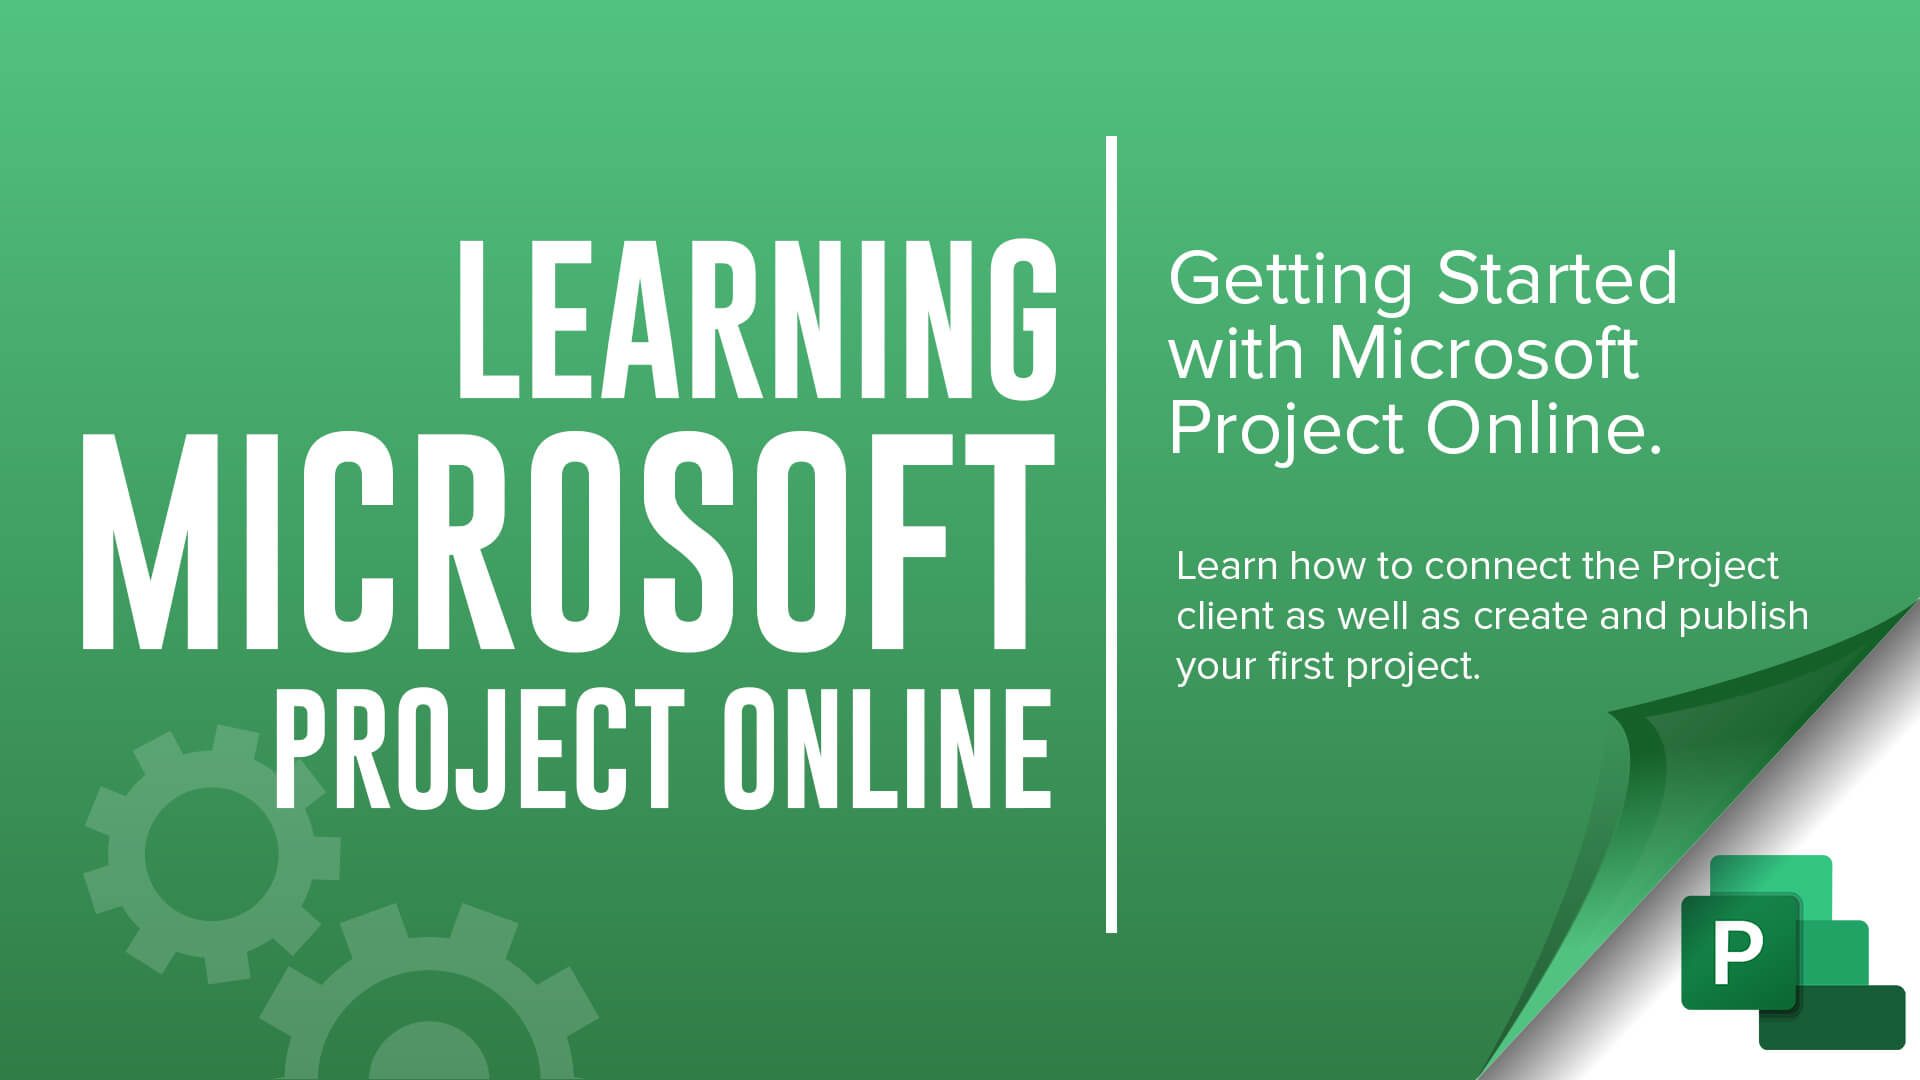 Learning Microsoft Project Online - Getting Started